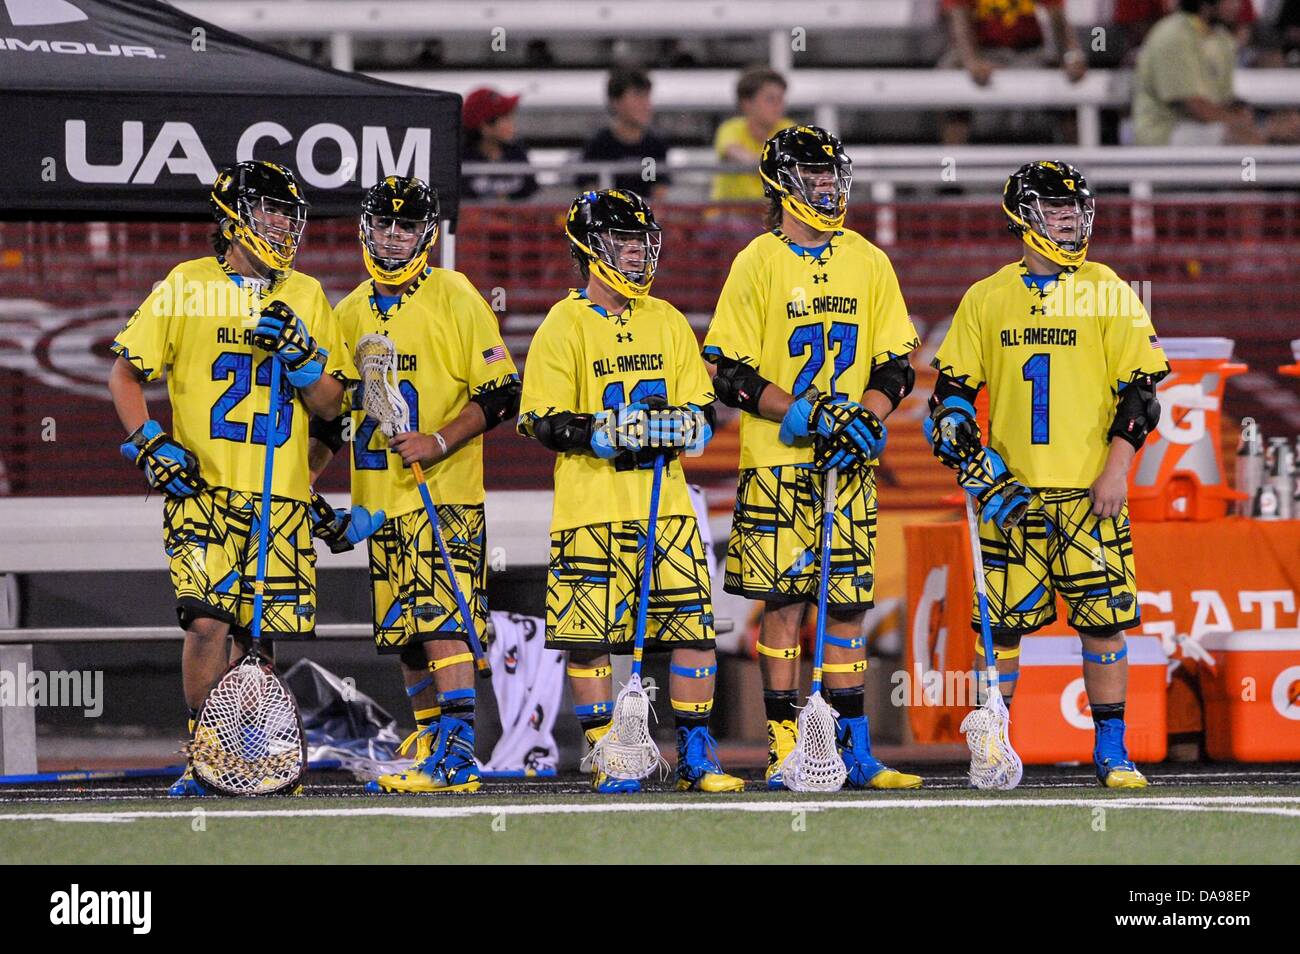 July 6, 2013 - Baltimore, MD, United States of America - July 6, 2013 Baltimore, MD.South All-Star players Dan Morris #23 Stephen Kelly #24 Mac Pons #14 Colin Heacock #22 and Matt Rambo #1 on the sideline during the 8th Annual Under Armour All-American Lacrosse Classic at Johnny Unitas Stadium Baltimore on July 6, 2013..South defeats North 28-24. Stock Photo